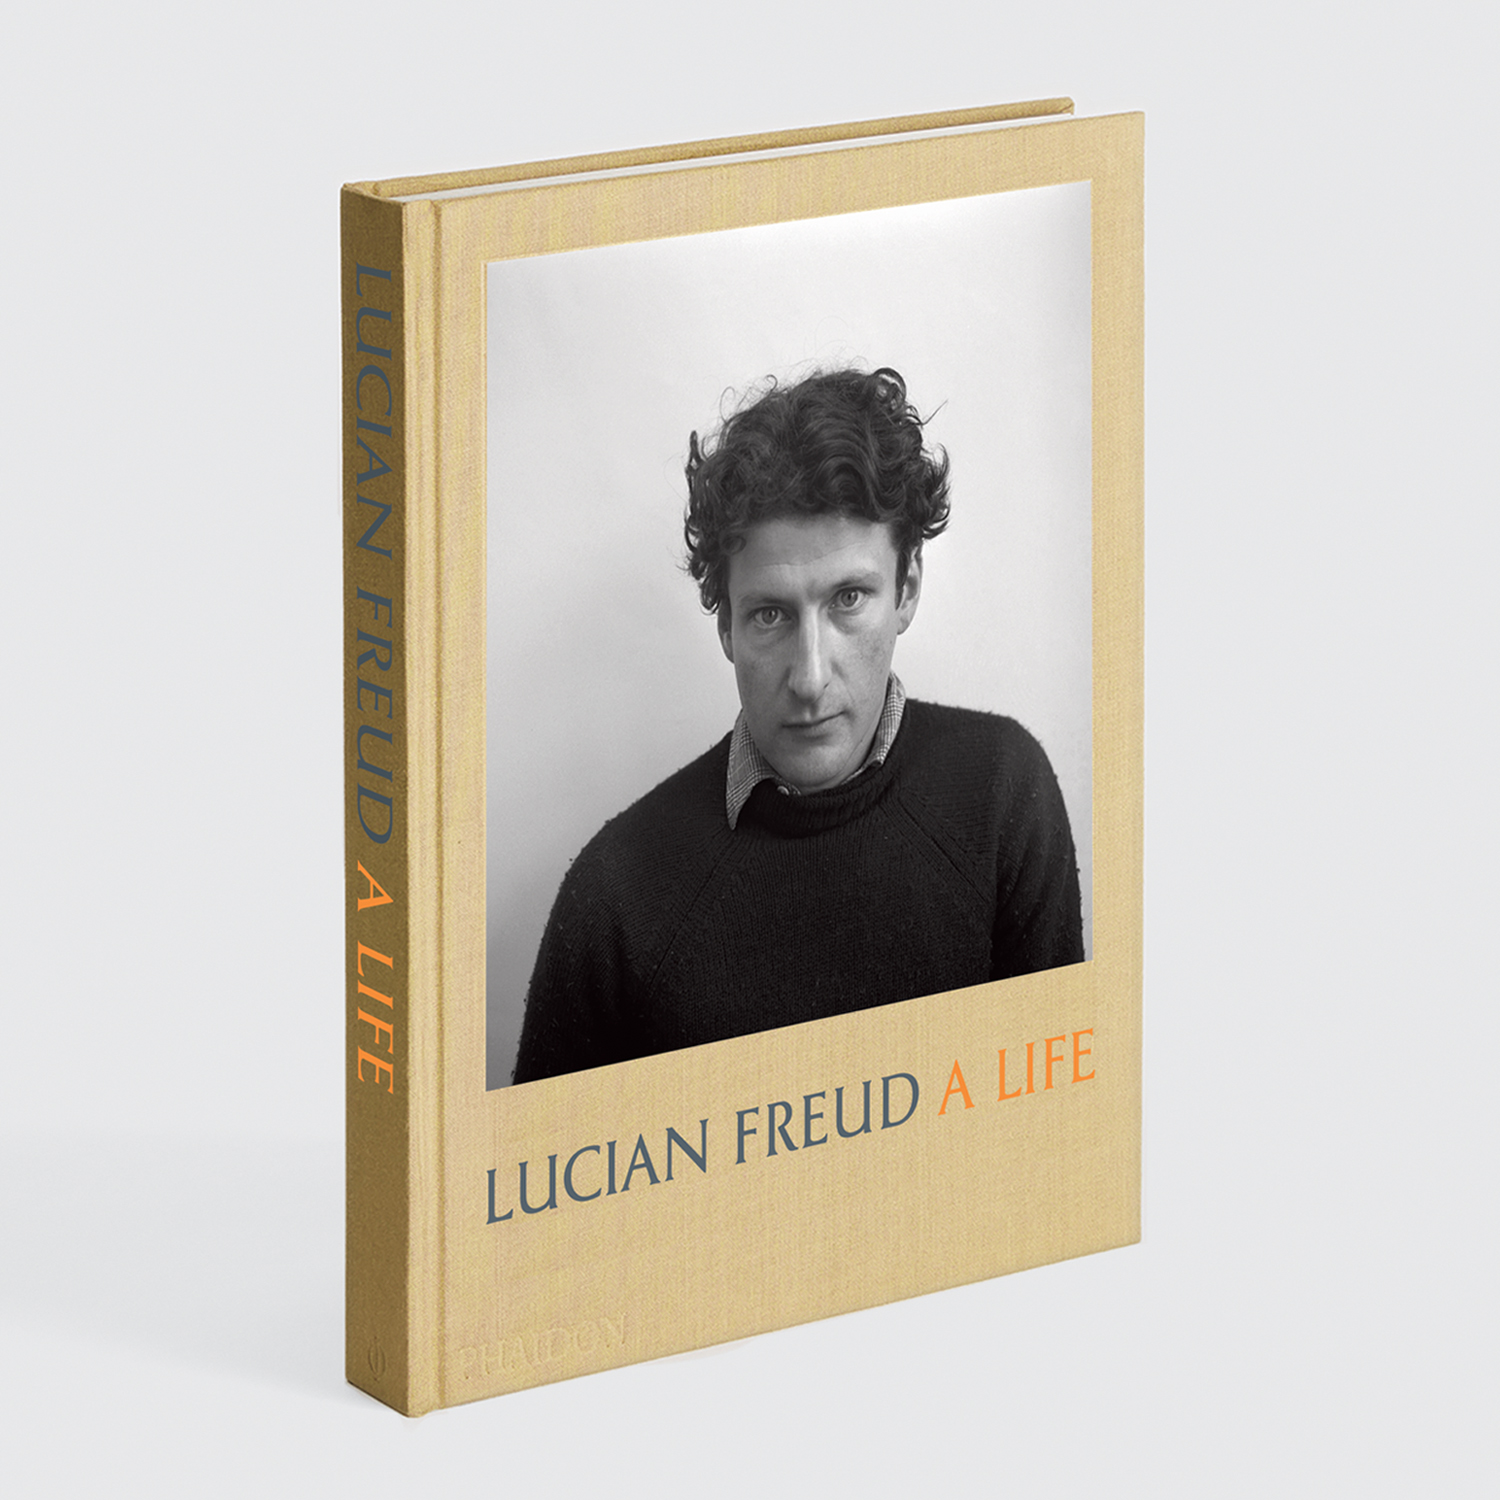 All you need to know about Lucian Freud A Life